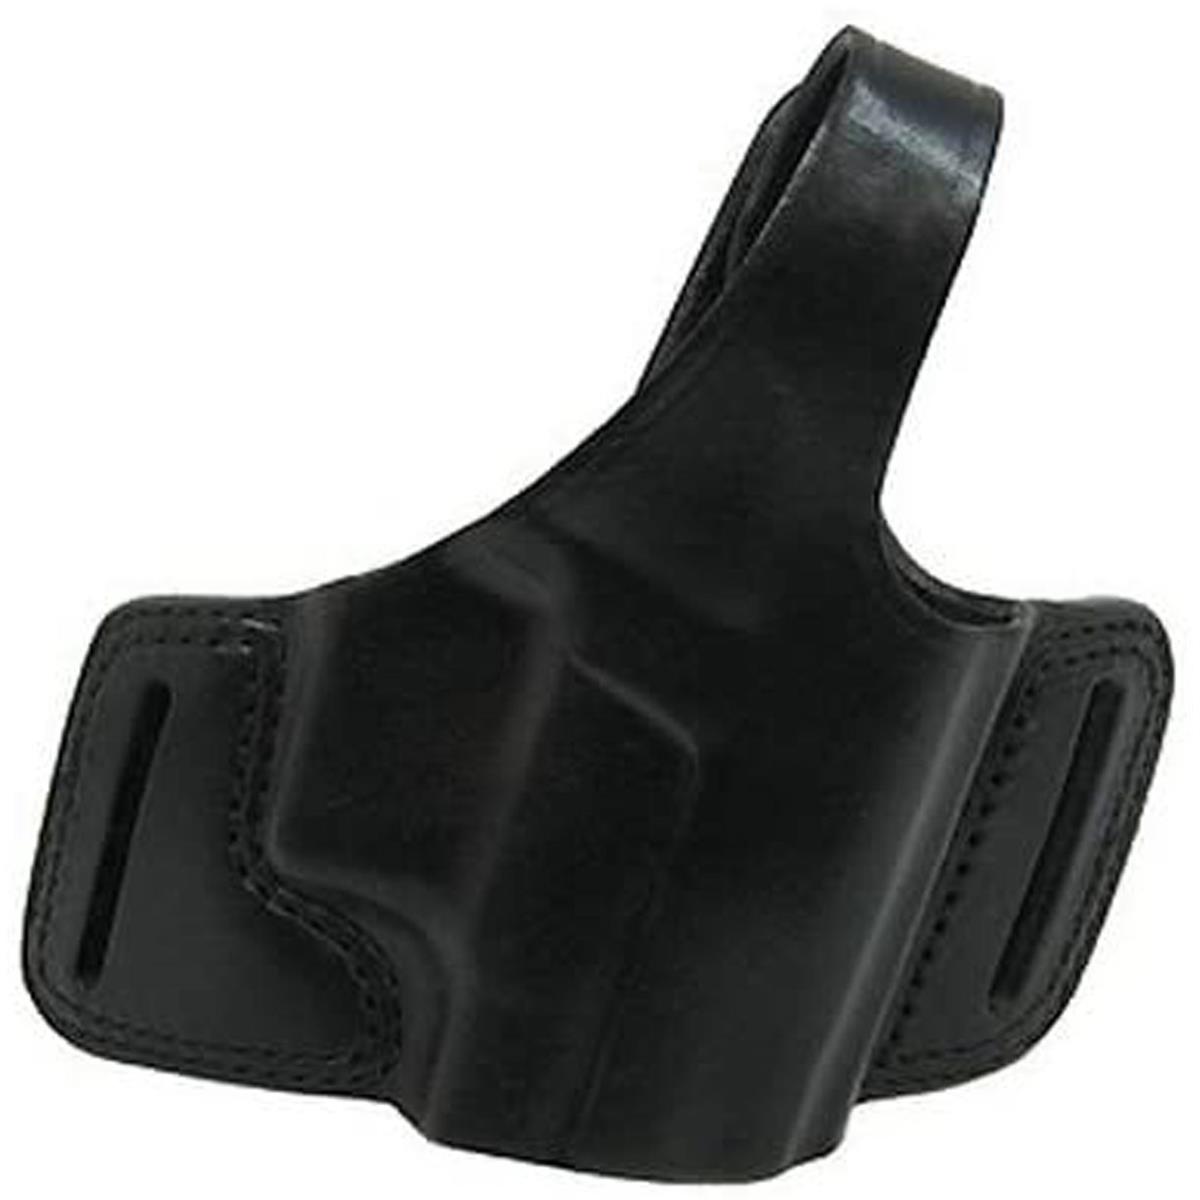 

Bianchi 5 Black Widow RH Outside Waistband Holster for Ruger LCP Pistol, Black